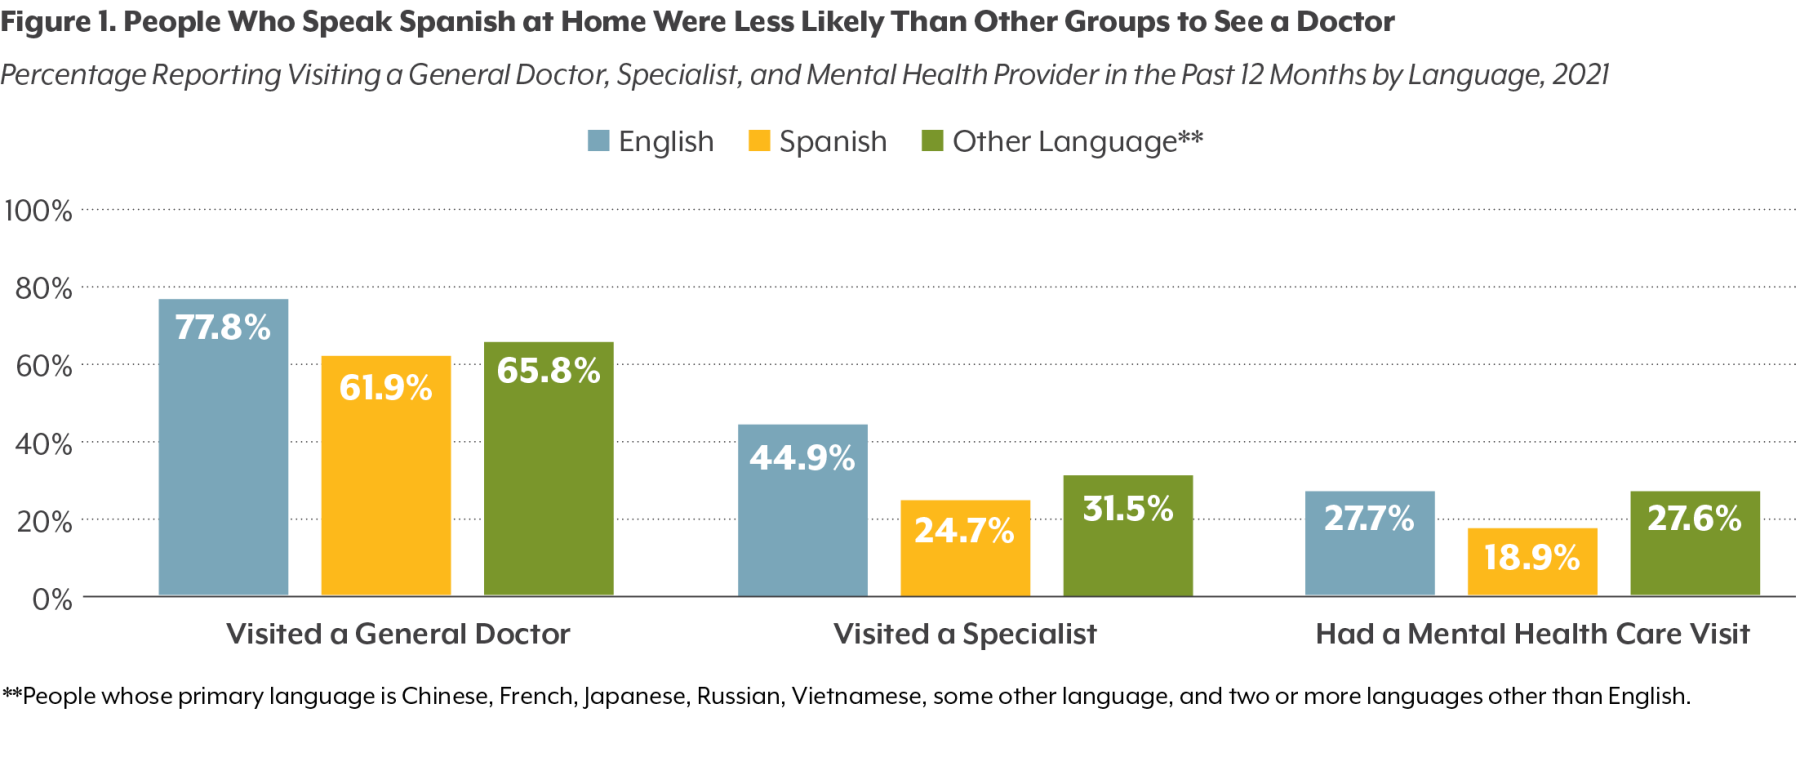 People Who Speak Spanish at Home Were Less Likely Than Other Groups to See a Doctor